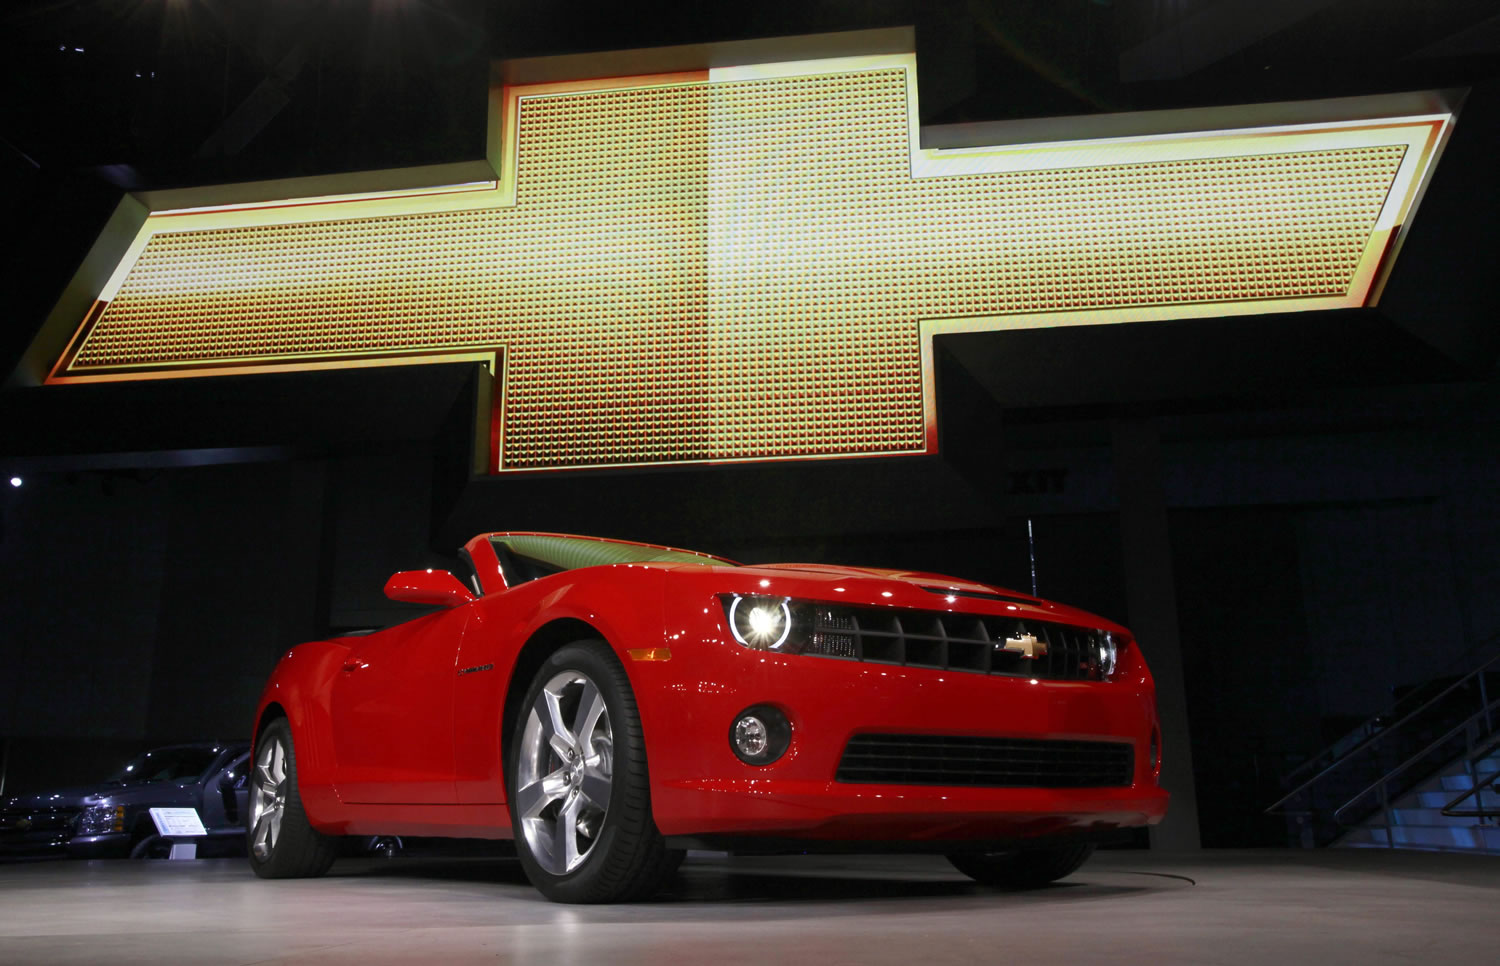 The 2011 Chevrolet Camaro convertible debuts in 2010 at the Los Angeles Auto Show.